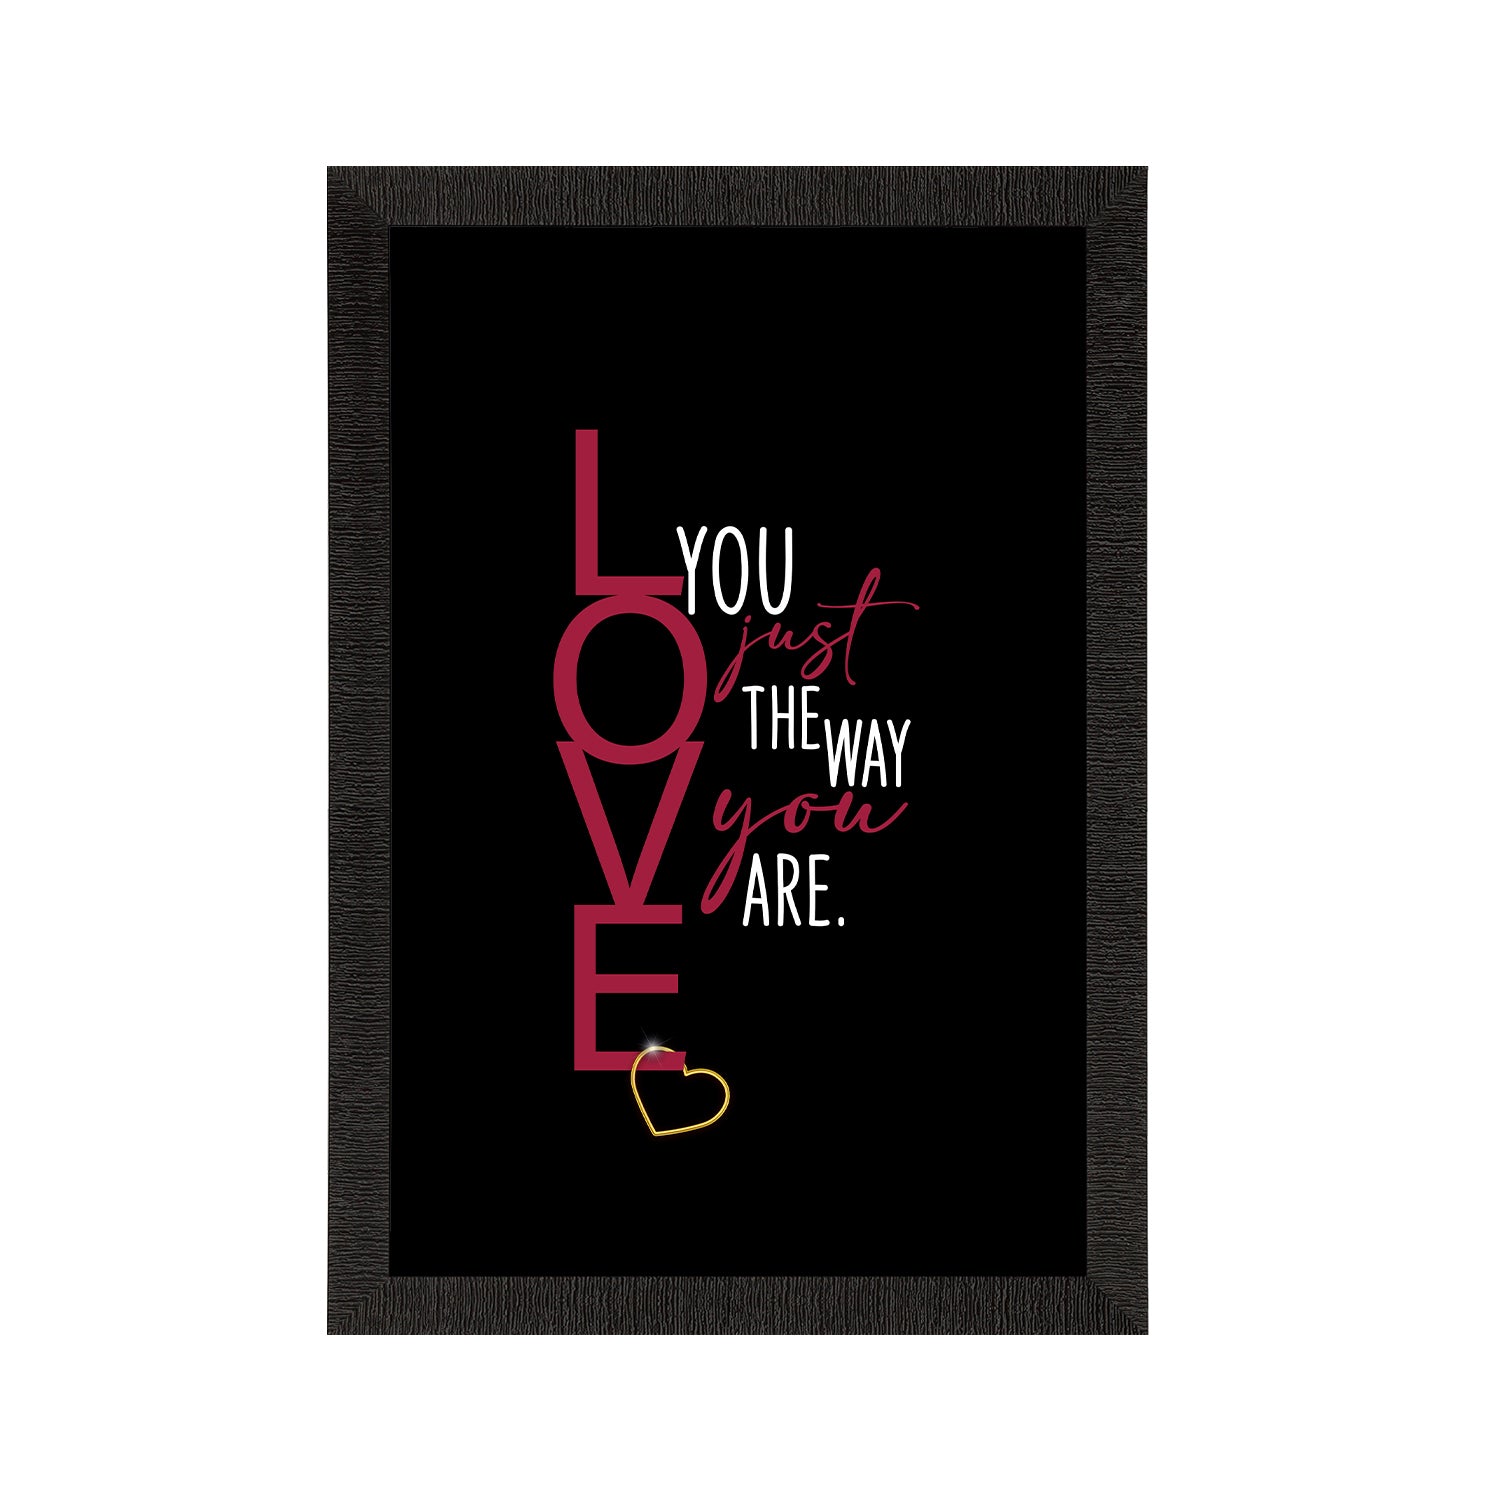 "Love you just the way you are" Quirky Quote Satin Matt Texture UV Art Painting